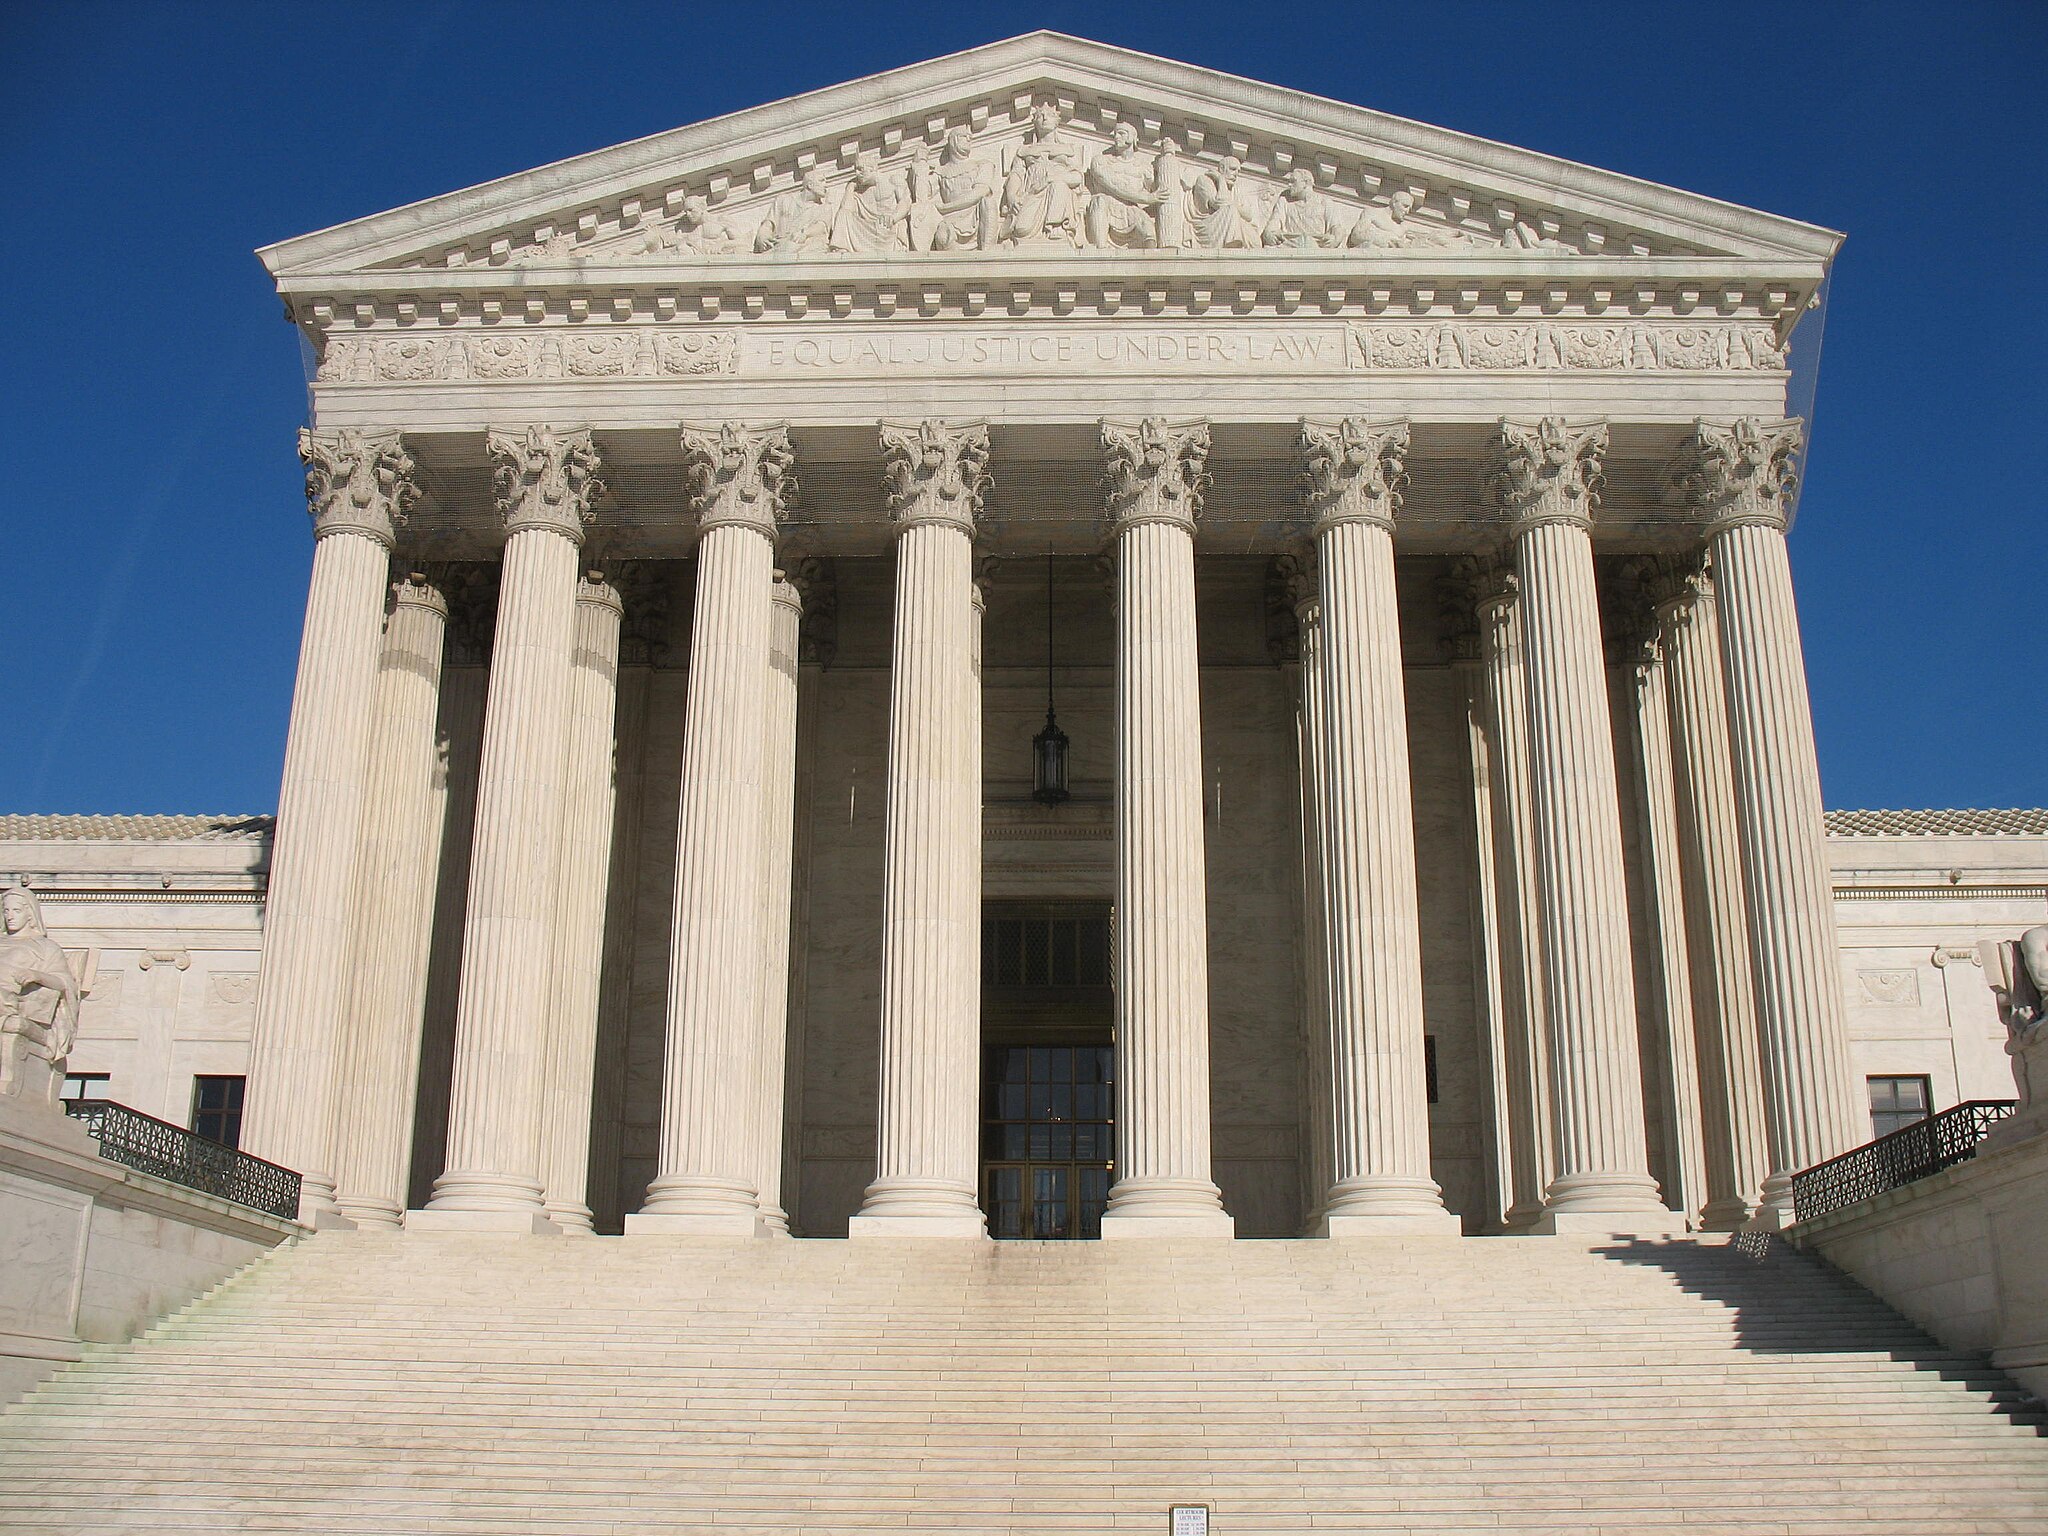 A front-facing view of the U.S. Supreme Court